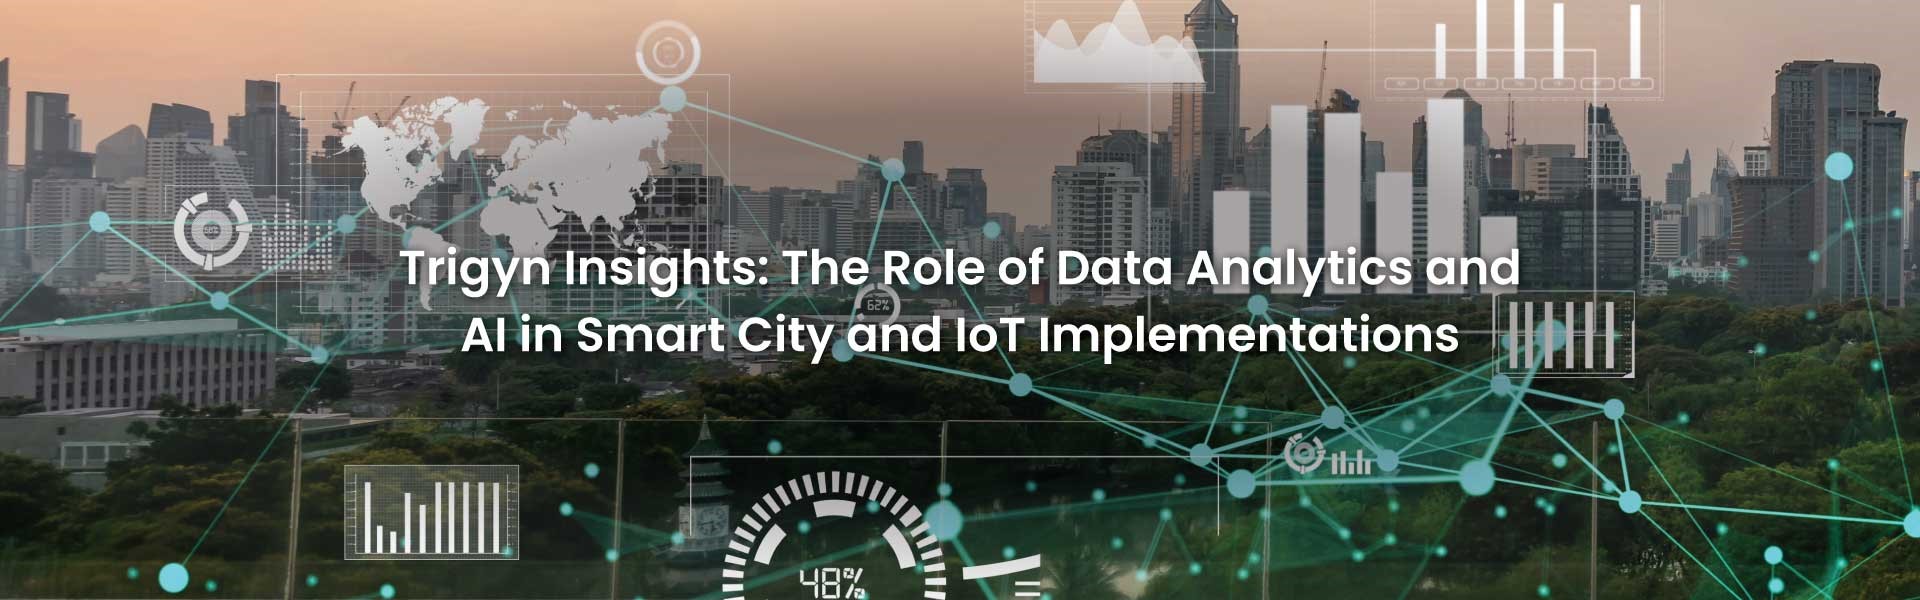 Data Analytics and AI in Smart City and IoT Implementations